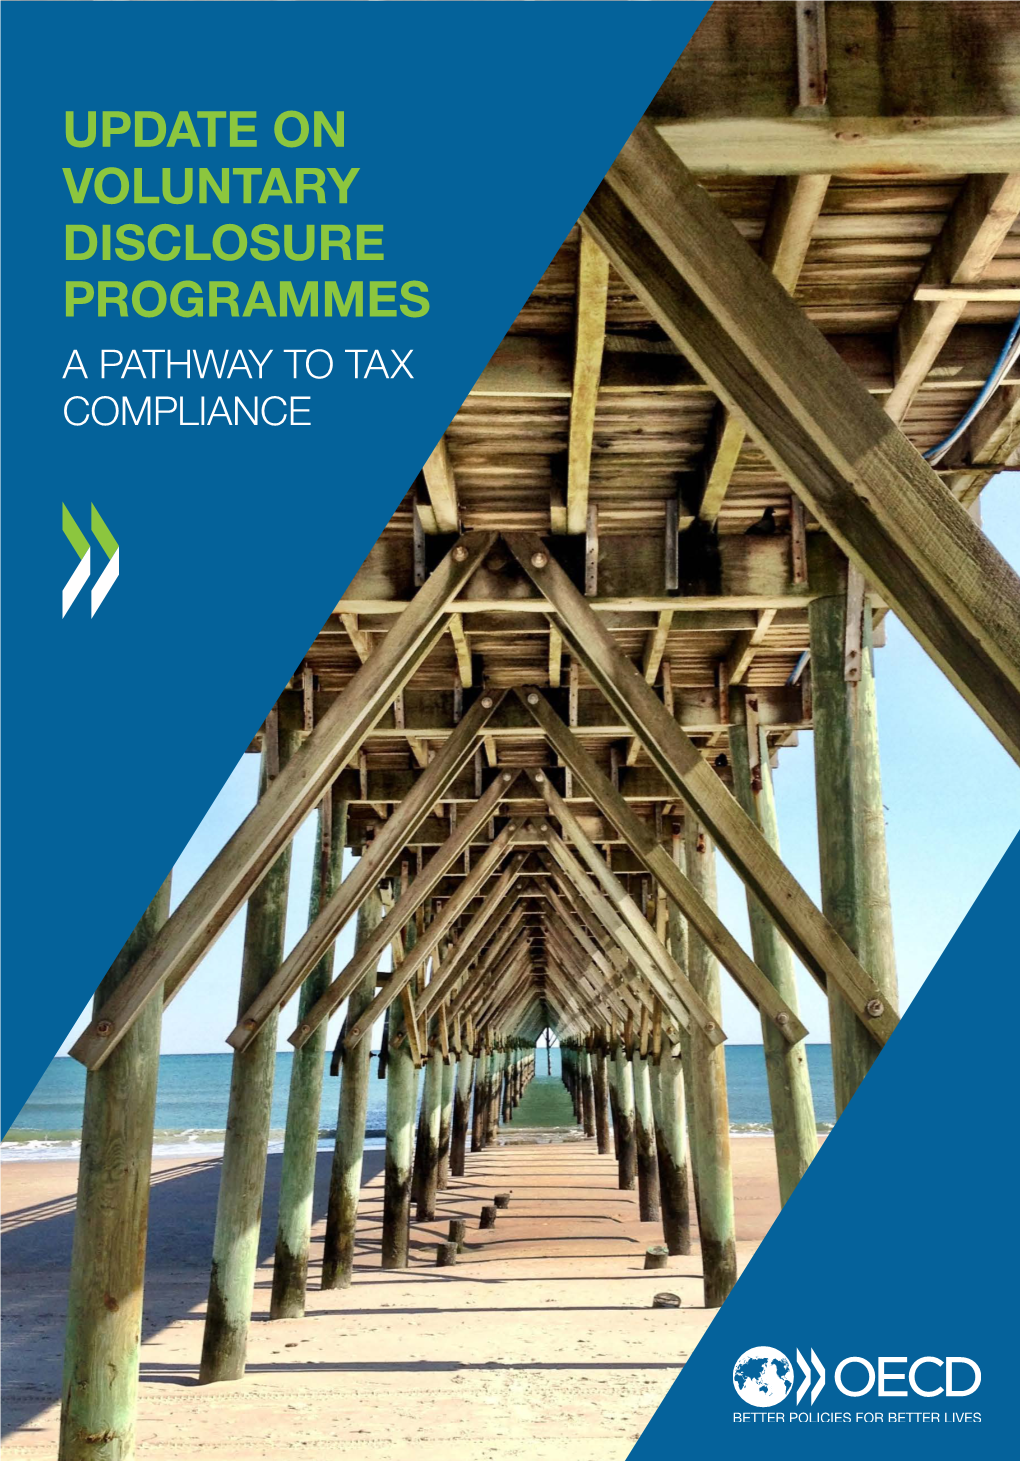 Update on Voluntary Disclosure Programmes a Pathway to Tax Compliance